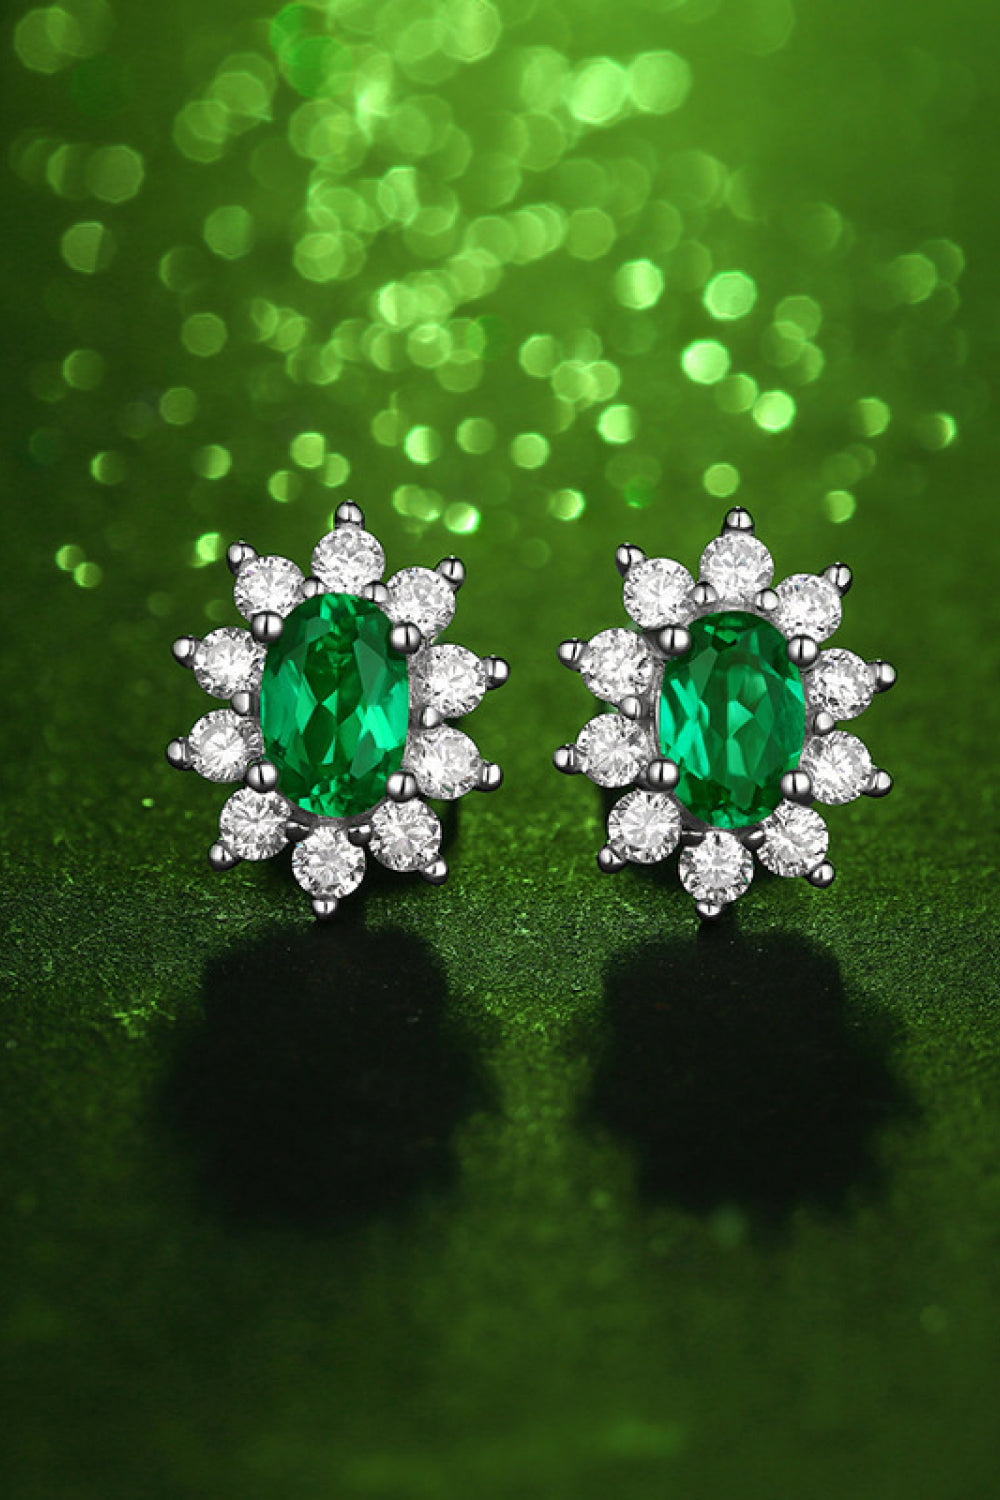 1 Carat Lab-Grown Emerald Stud Earrings - Tophatter Deals and Online Shopping - Electronics, Jewelry, Beauty, Health, Gadgets, Fashion - Tophatter's Discounts & Offers